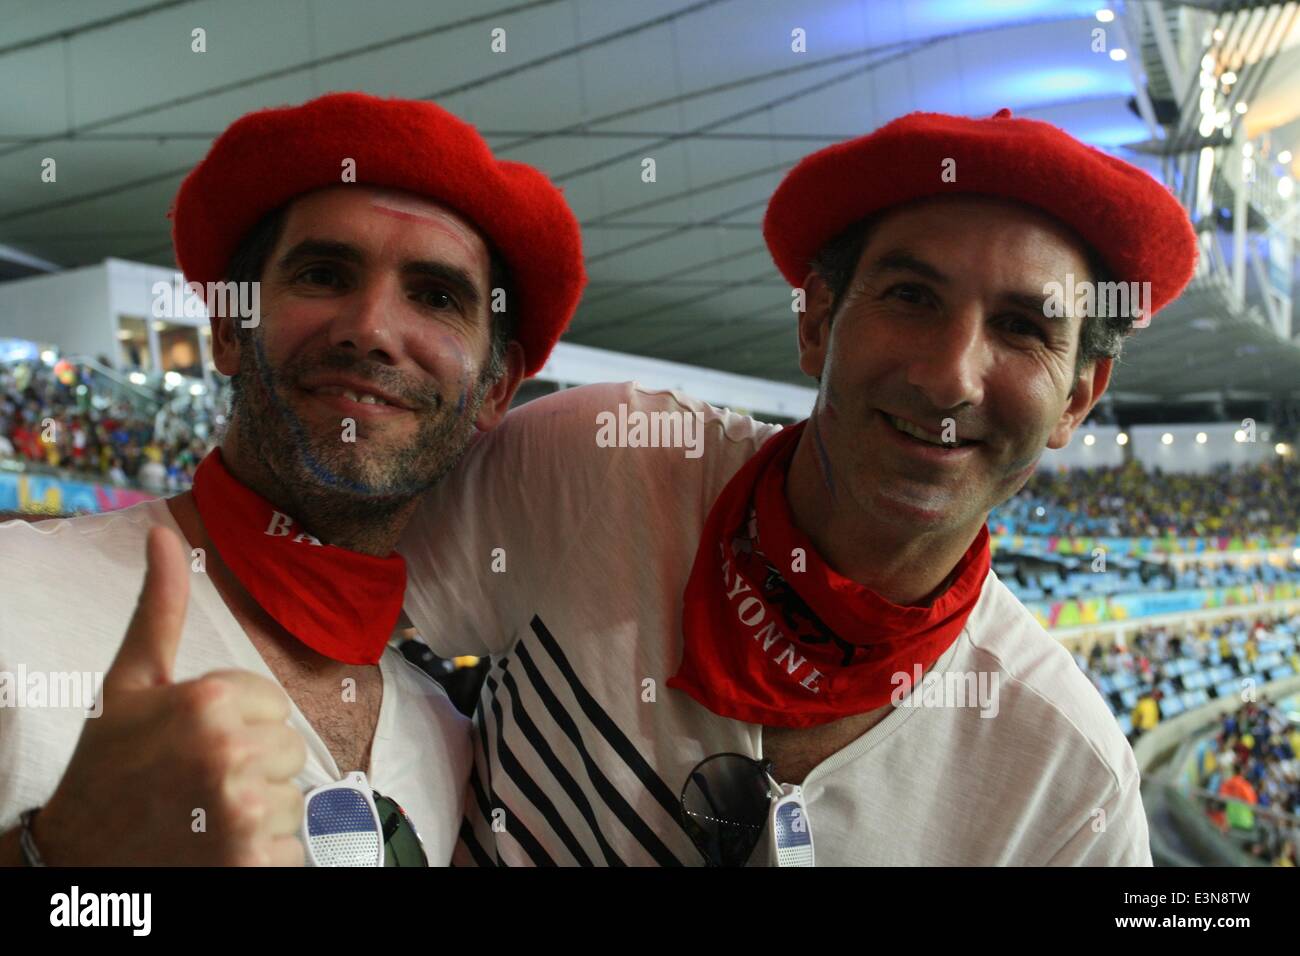 Rio de Janeiro, Brazil. 25th June, 2014. 2014 FIFA World Cup Brazil. French fans at Maracanã in the match against Ecuador. Final score 0-0, thus qualifying France as first in its group for the round of 16. Rio de Janeiro, Brazil, 25th June, 2014. Credit:  Maria Adelaide Silva/Alamy Live News Stock Photo